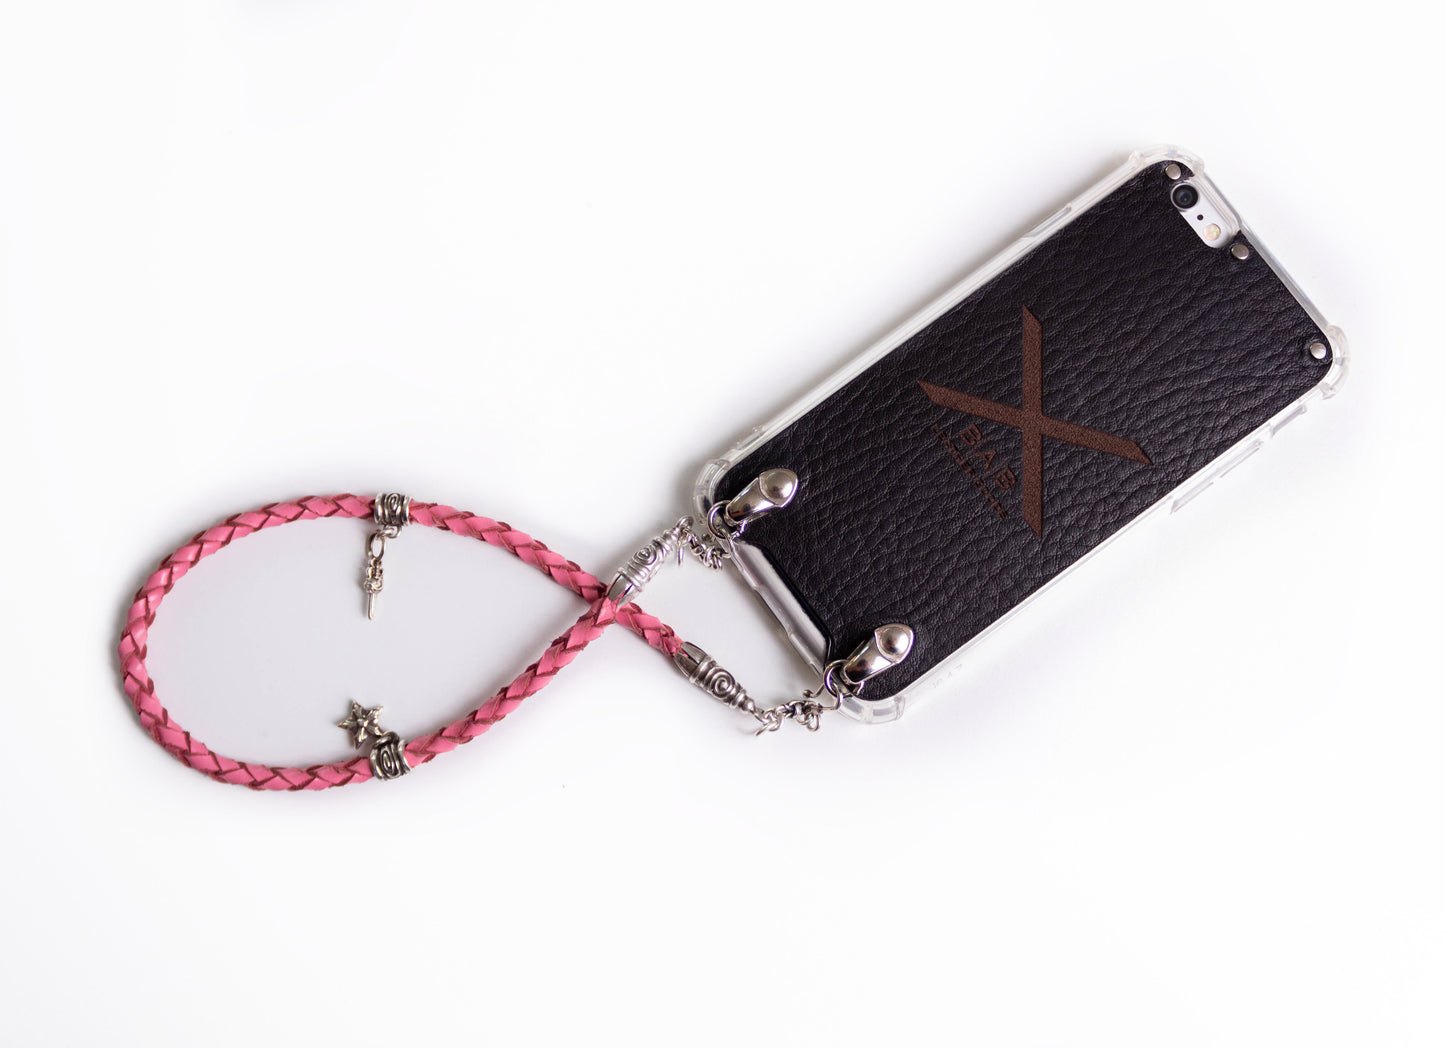 Full-Grain Genuine vegetable-tanned Leather & 925 Sterling Silver Case for iPhone. Pink Genuine Leather Bracelet/Choker/Strap 4 hand-braided strands.- F02